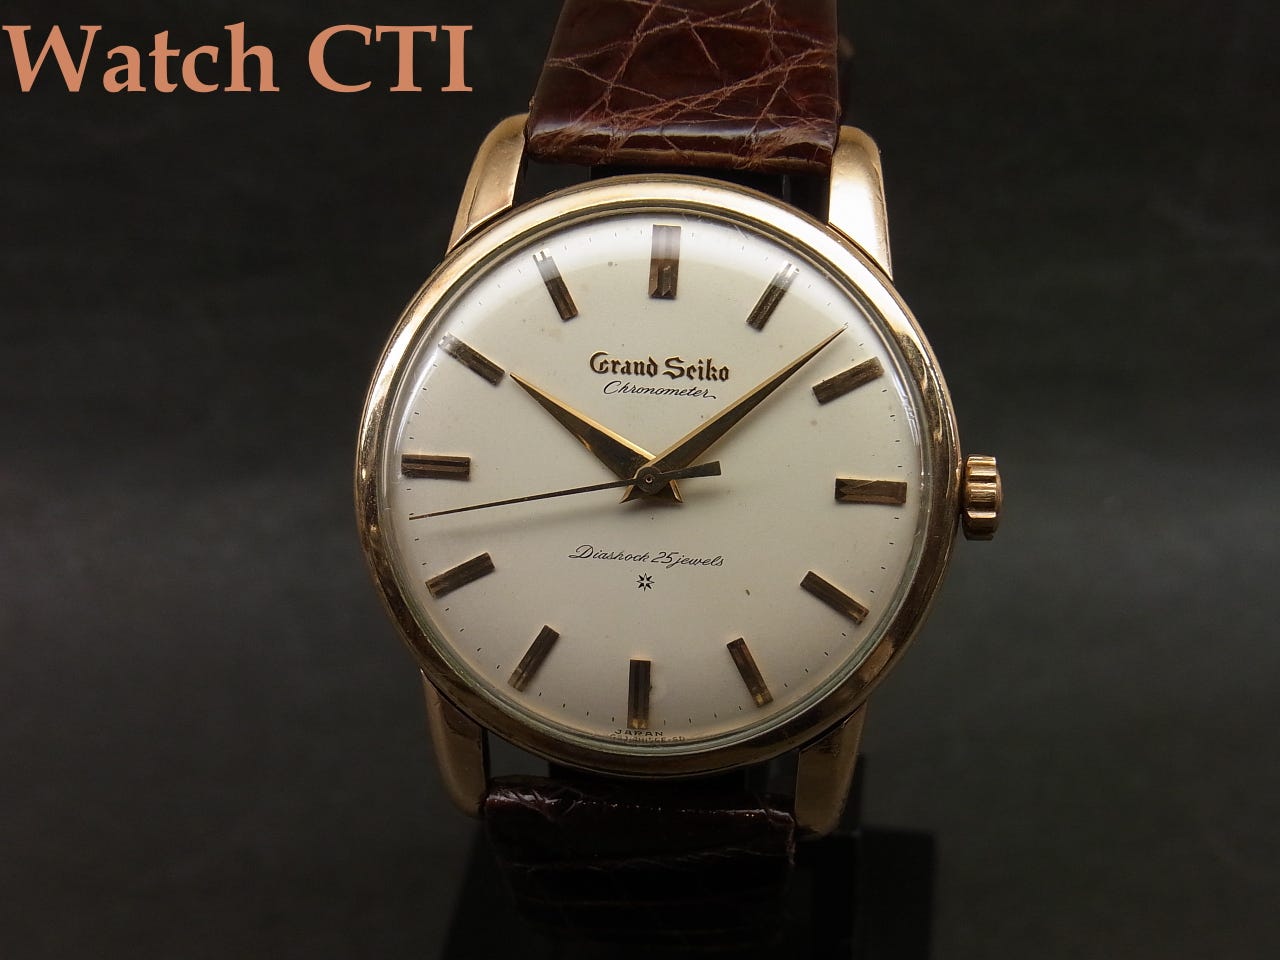 Stupid people are dangerous - the Grand Seiko guy